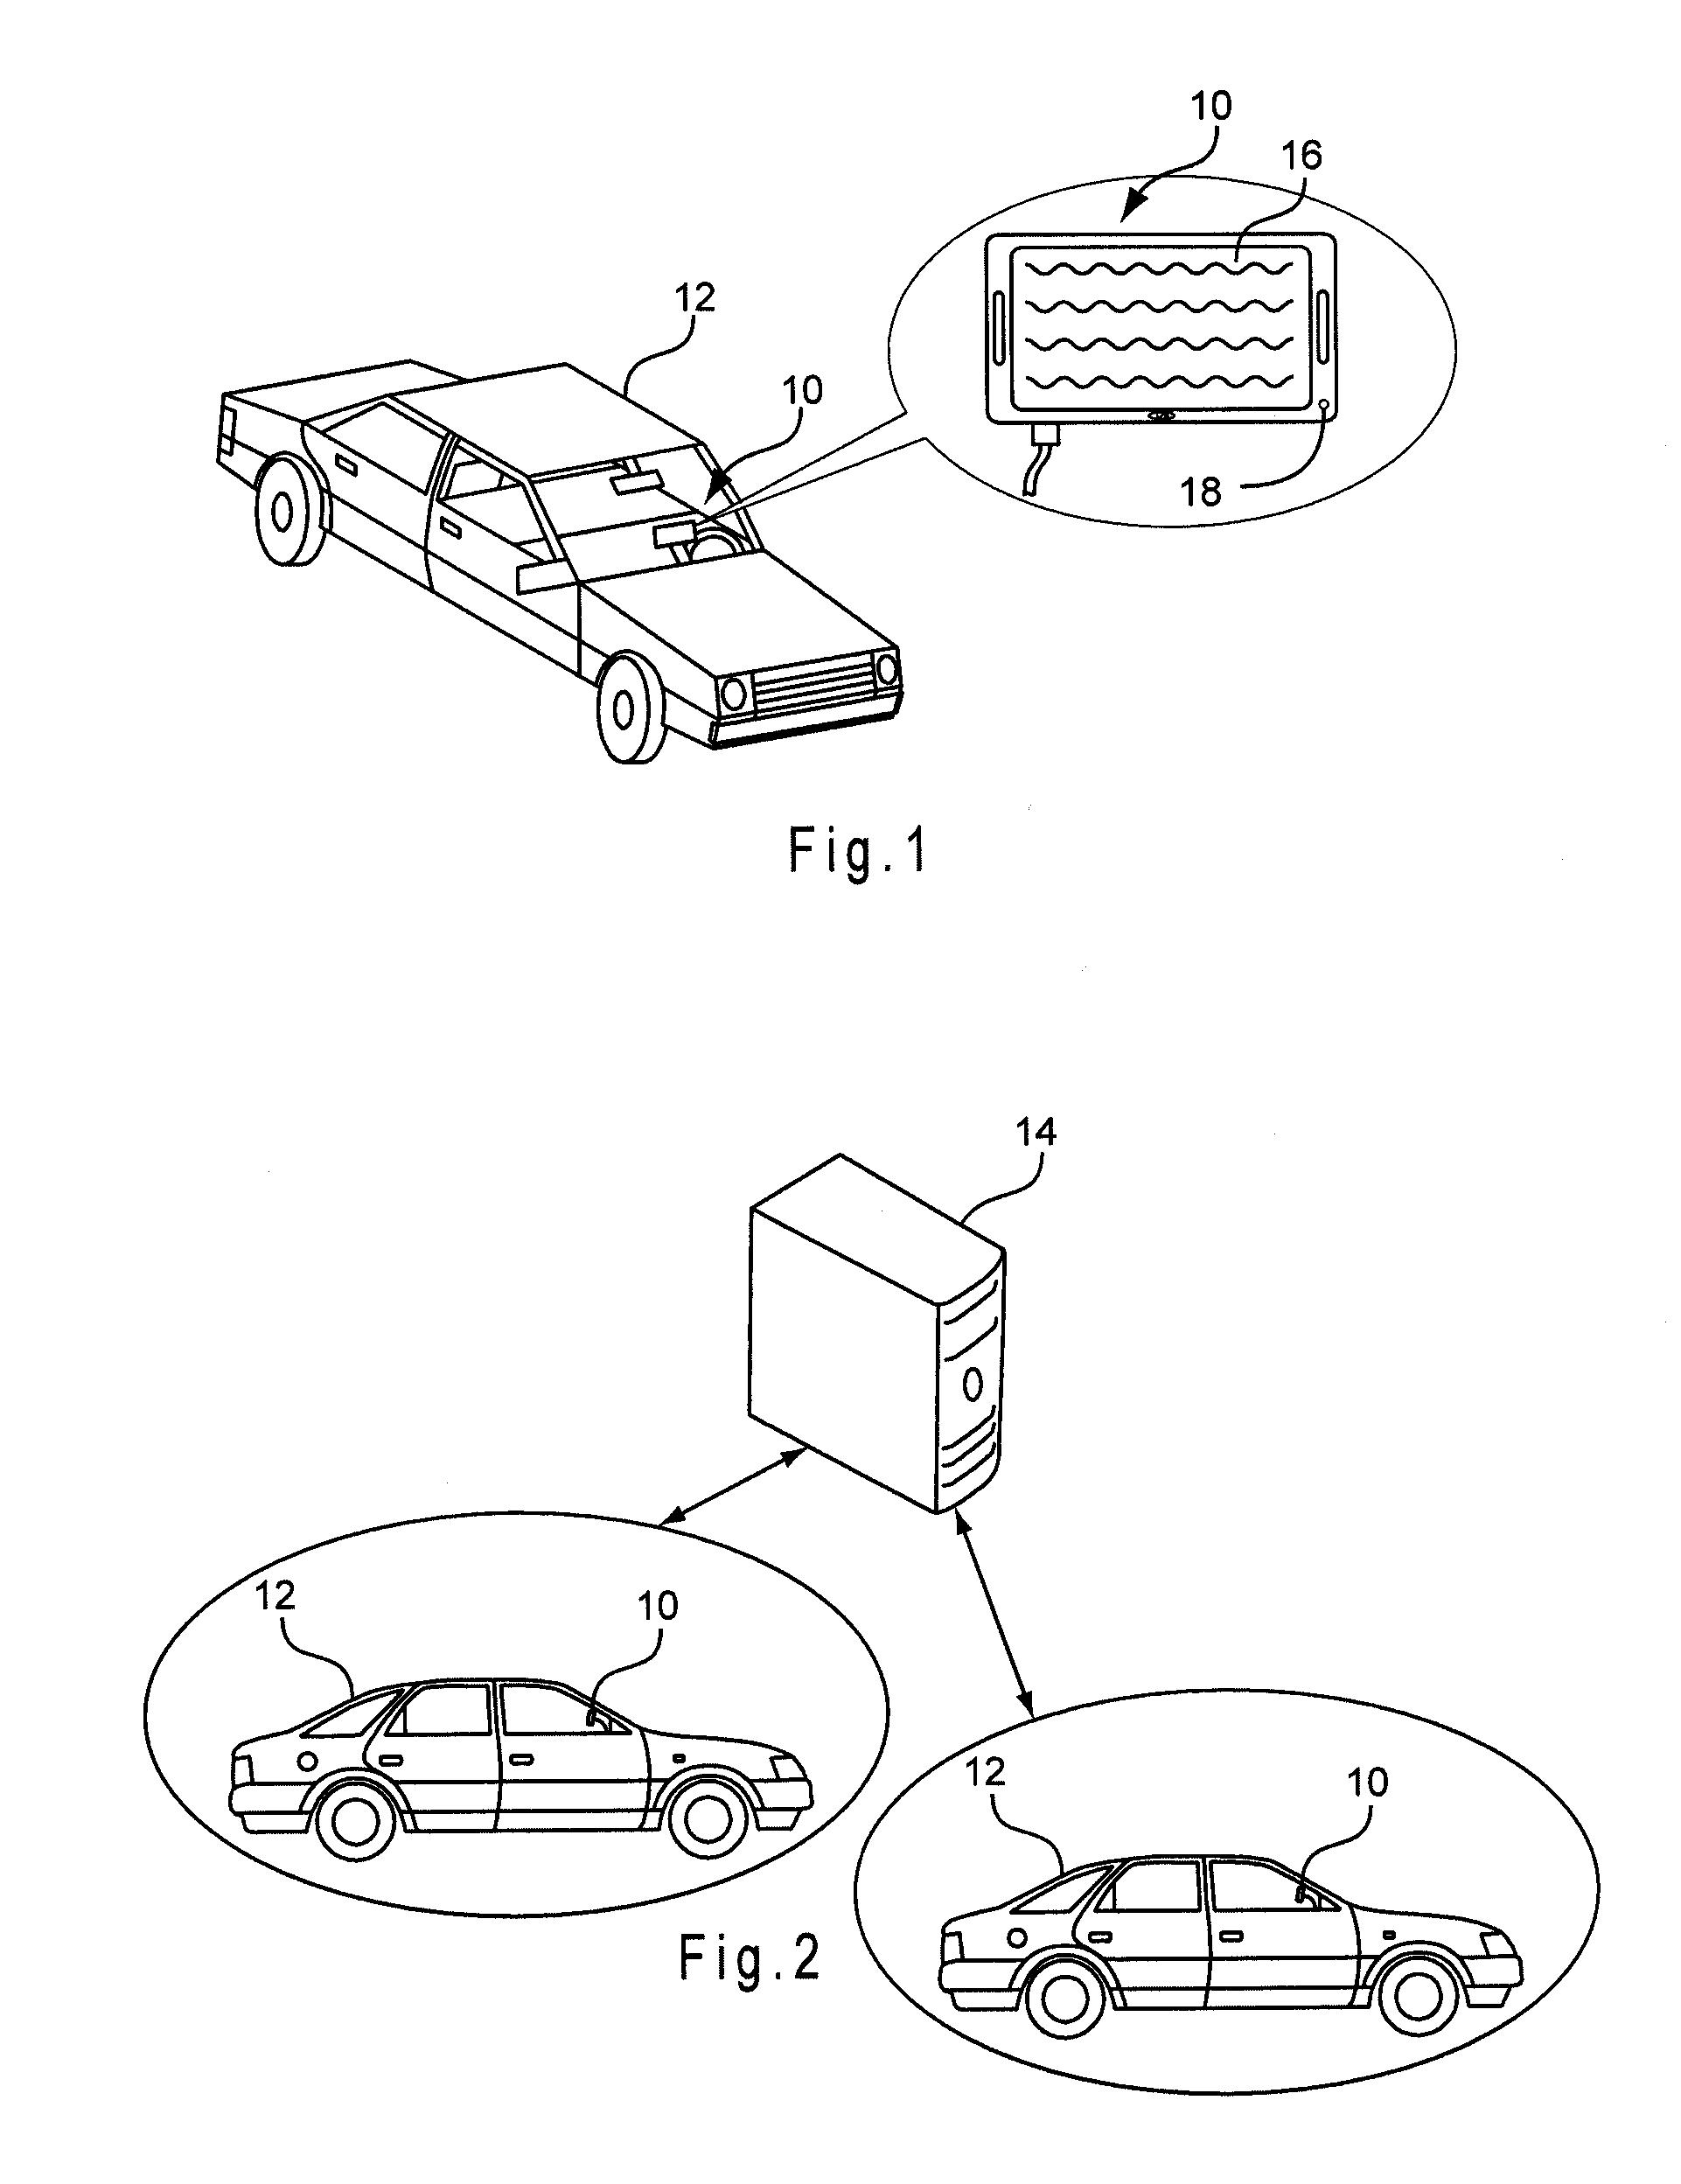 Virtual rent-a-car system and method with in-car concierge device